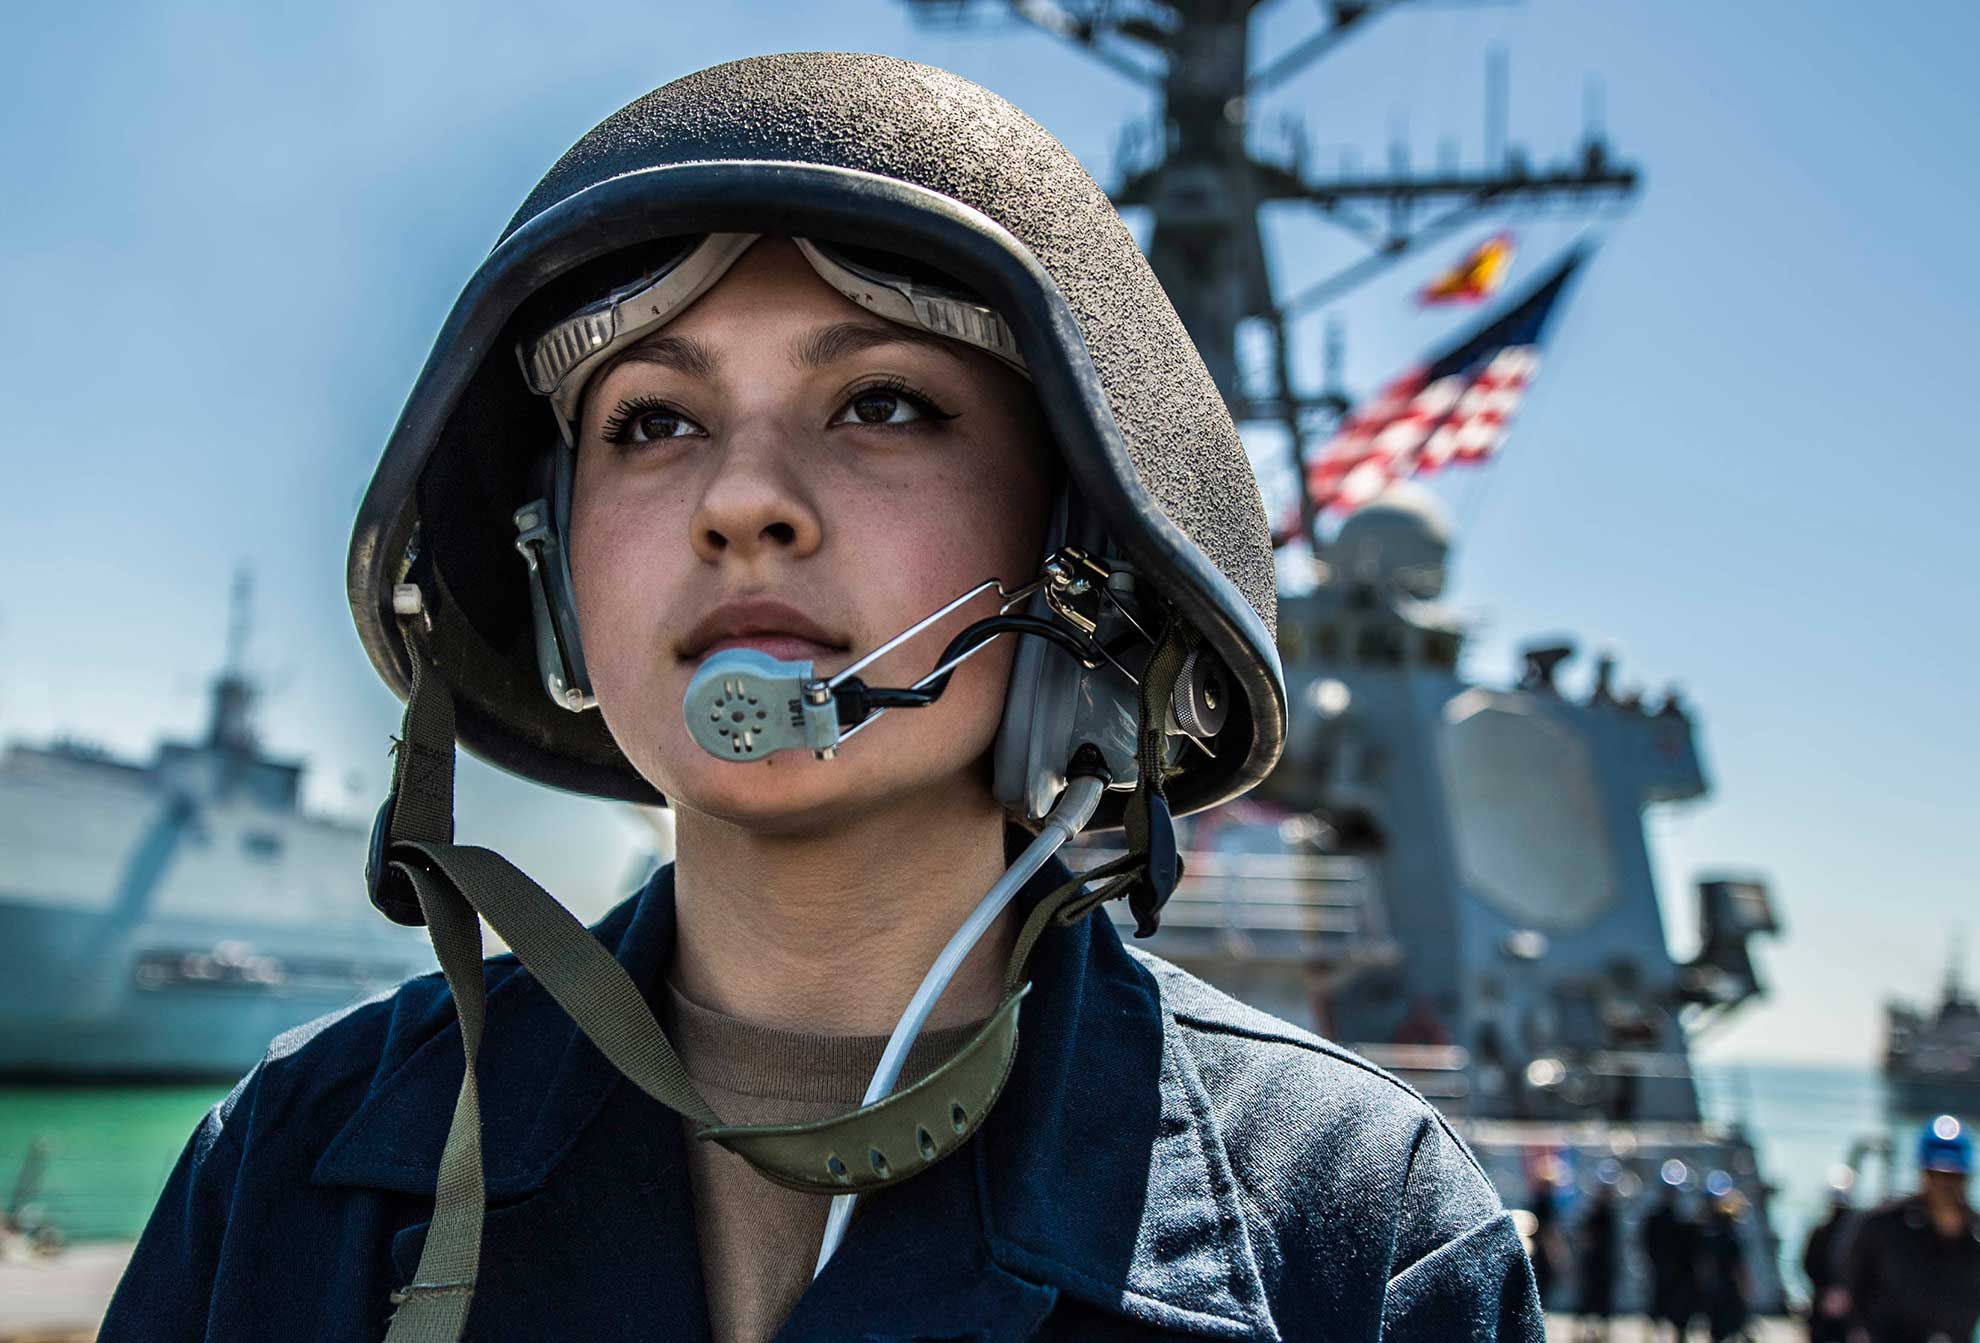 Rota, Spain (April 14, 2019) Boatswain's Mate Seaman Alyssa Mullinax stands watch as a phone talker aboard the Arleigh Burke-class guided-missile destroyer USS Porter (DDG 78) while arriving at Naval Station Rota, Spain, April 14, 2019. Porter, forward-deployed to Rota, Spain, is on its sixth patrol in the U.S. 6th Fleet area of operations in support of U.S national security interests in Europe and Africa -- U.S. Navy photo by MCS 1st Class James R. Turner. -